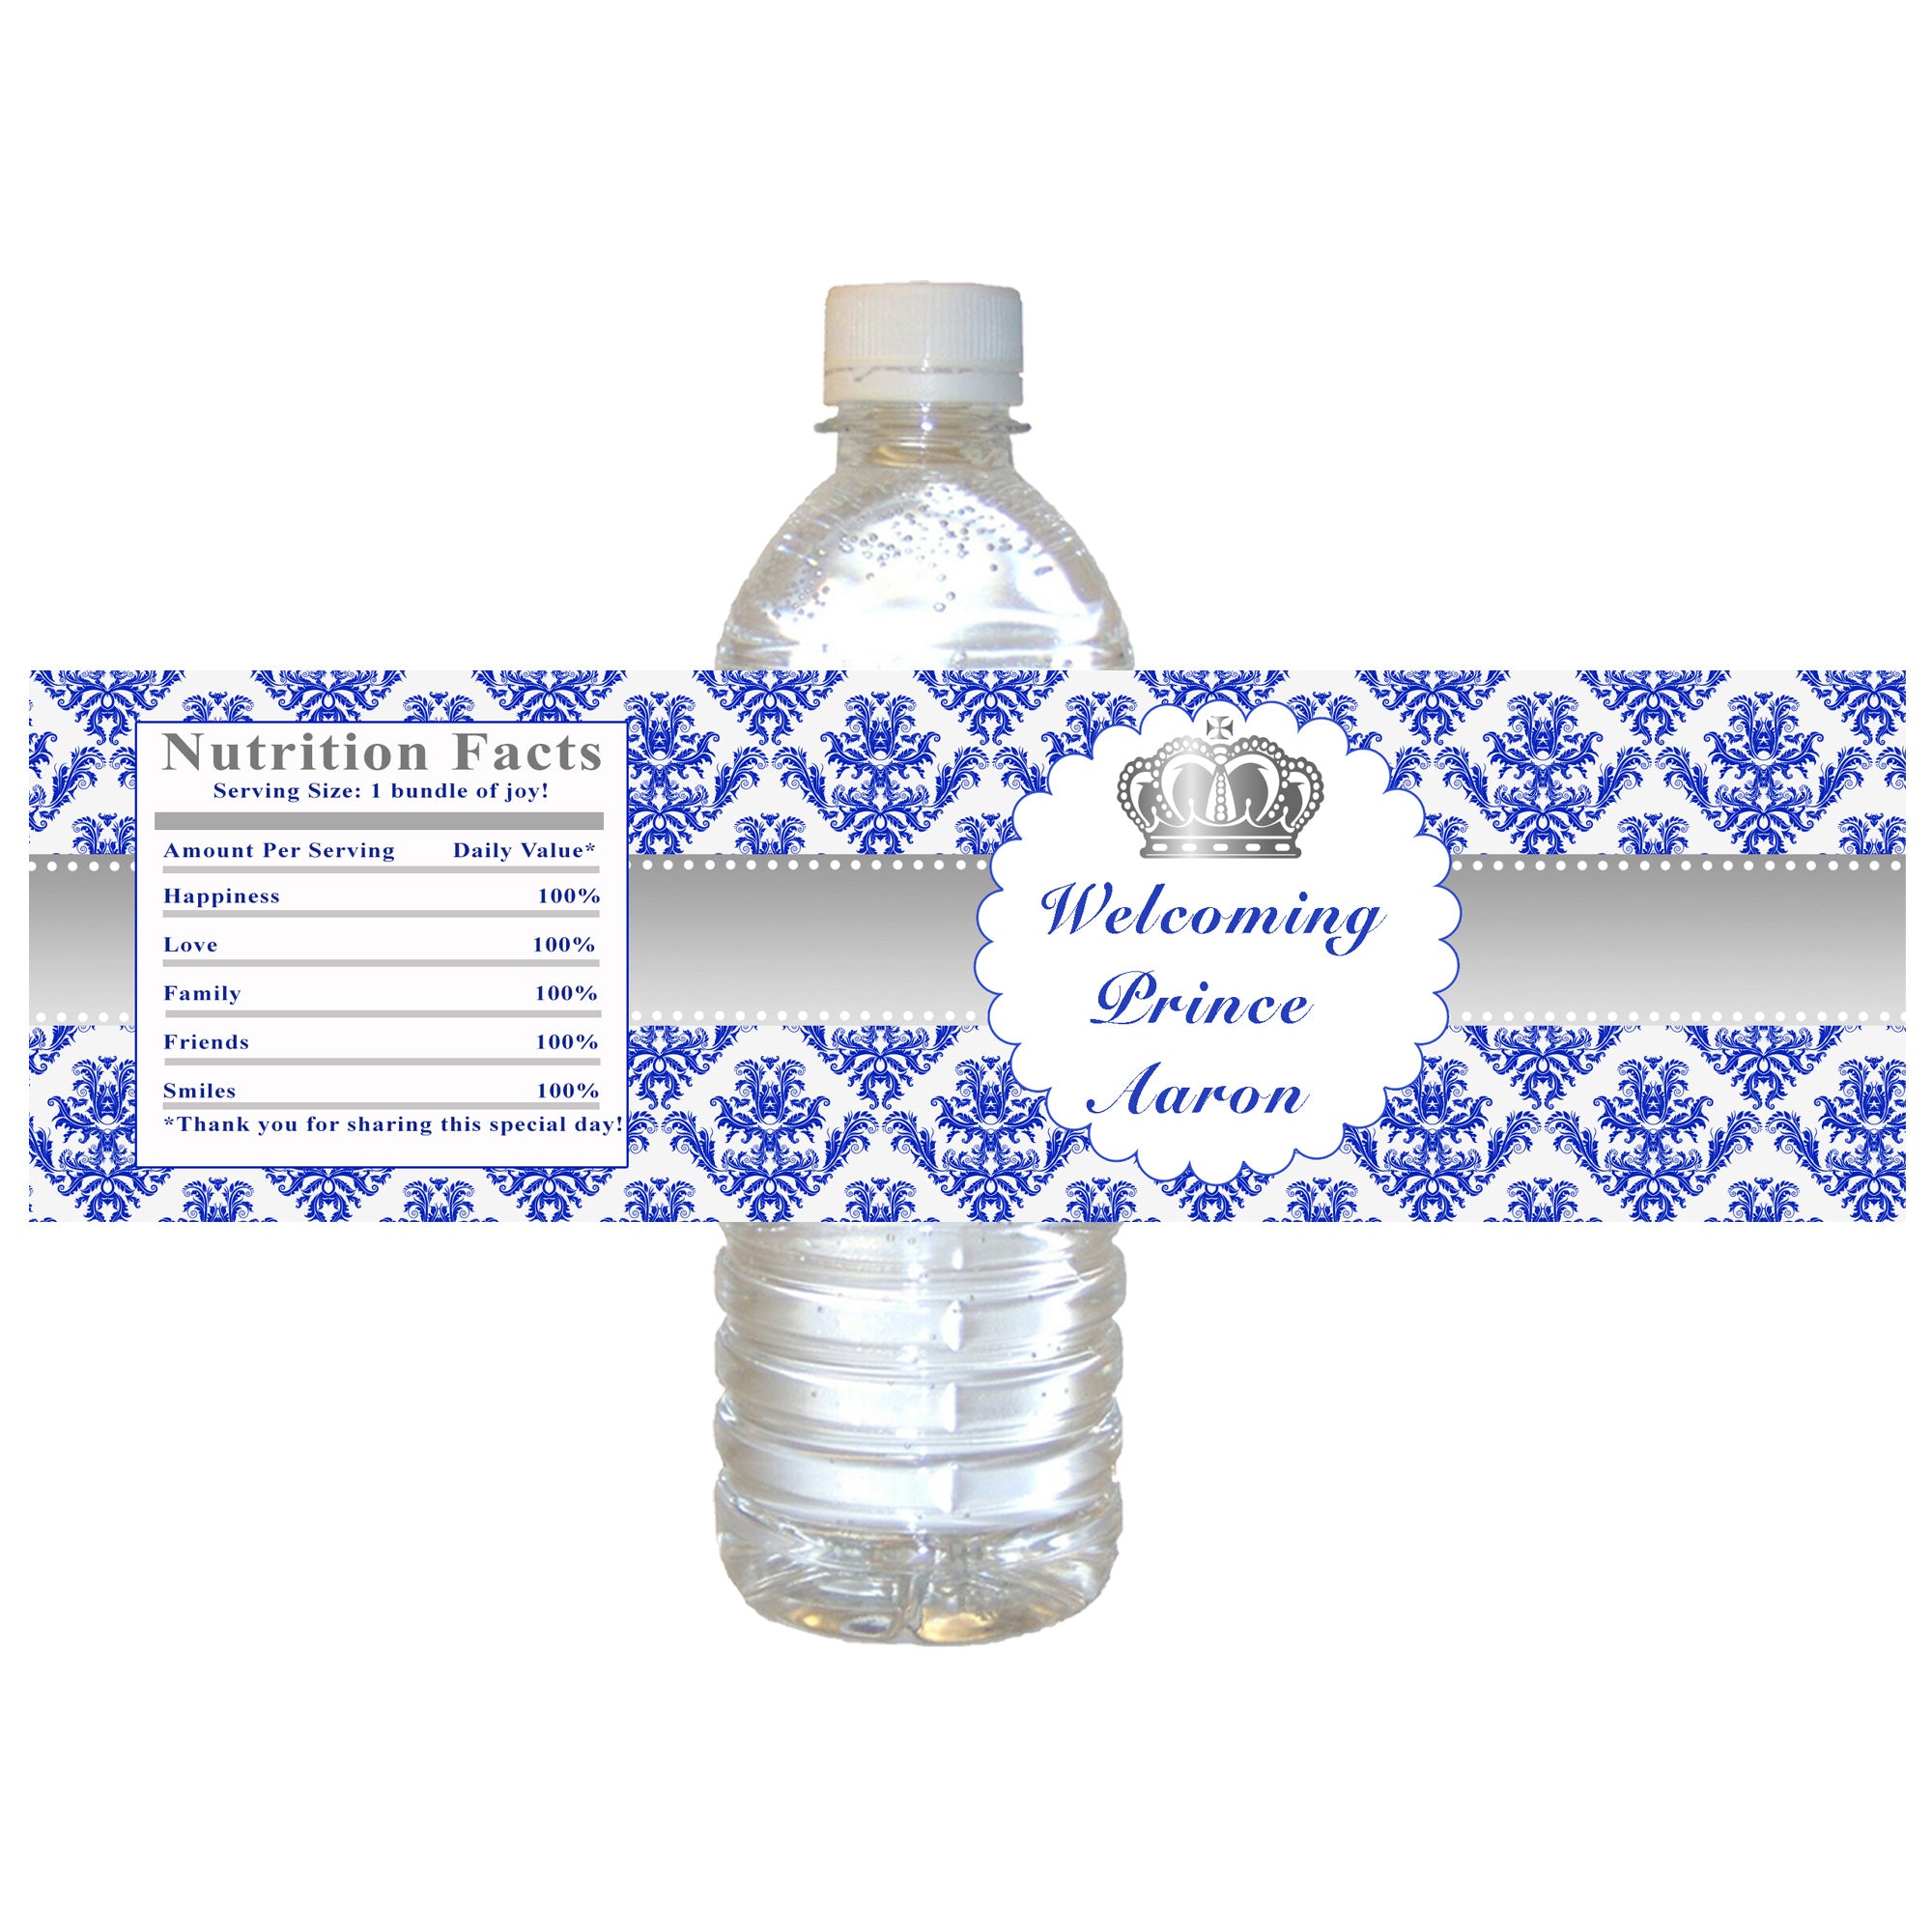 30 Prince silver royal blue bottle label birthday baby shower favors